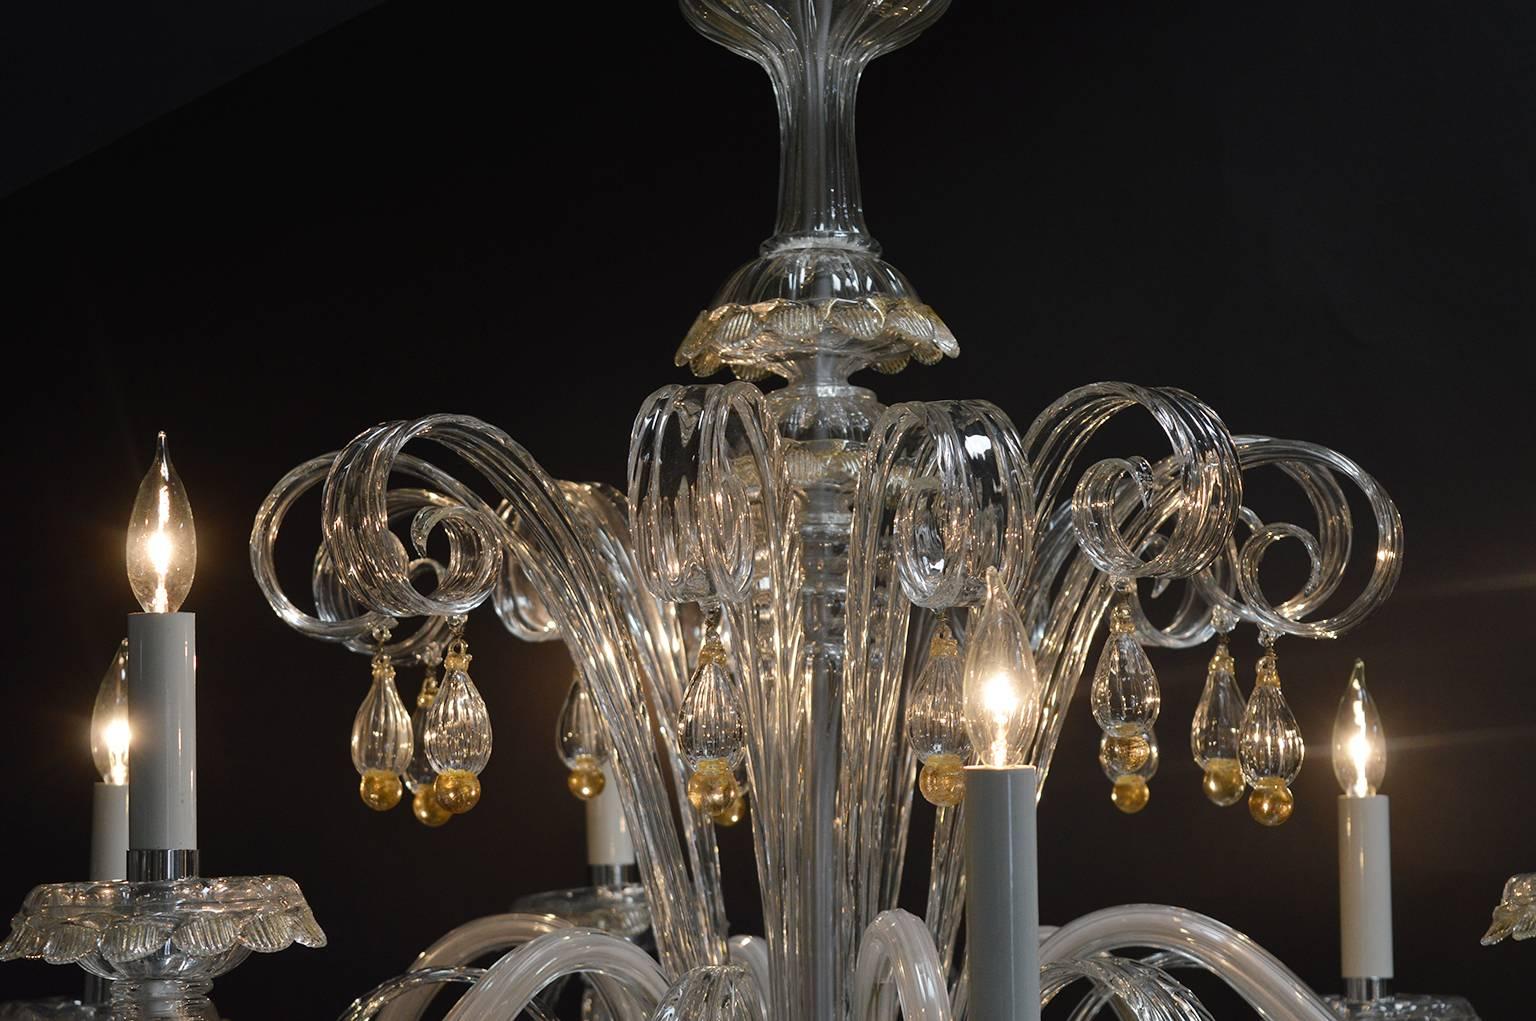 Six-light Murano chandelier. Handblown clear glass with gold flake accents.